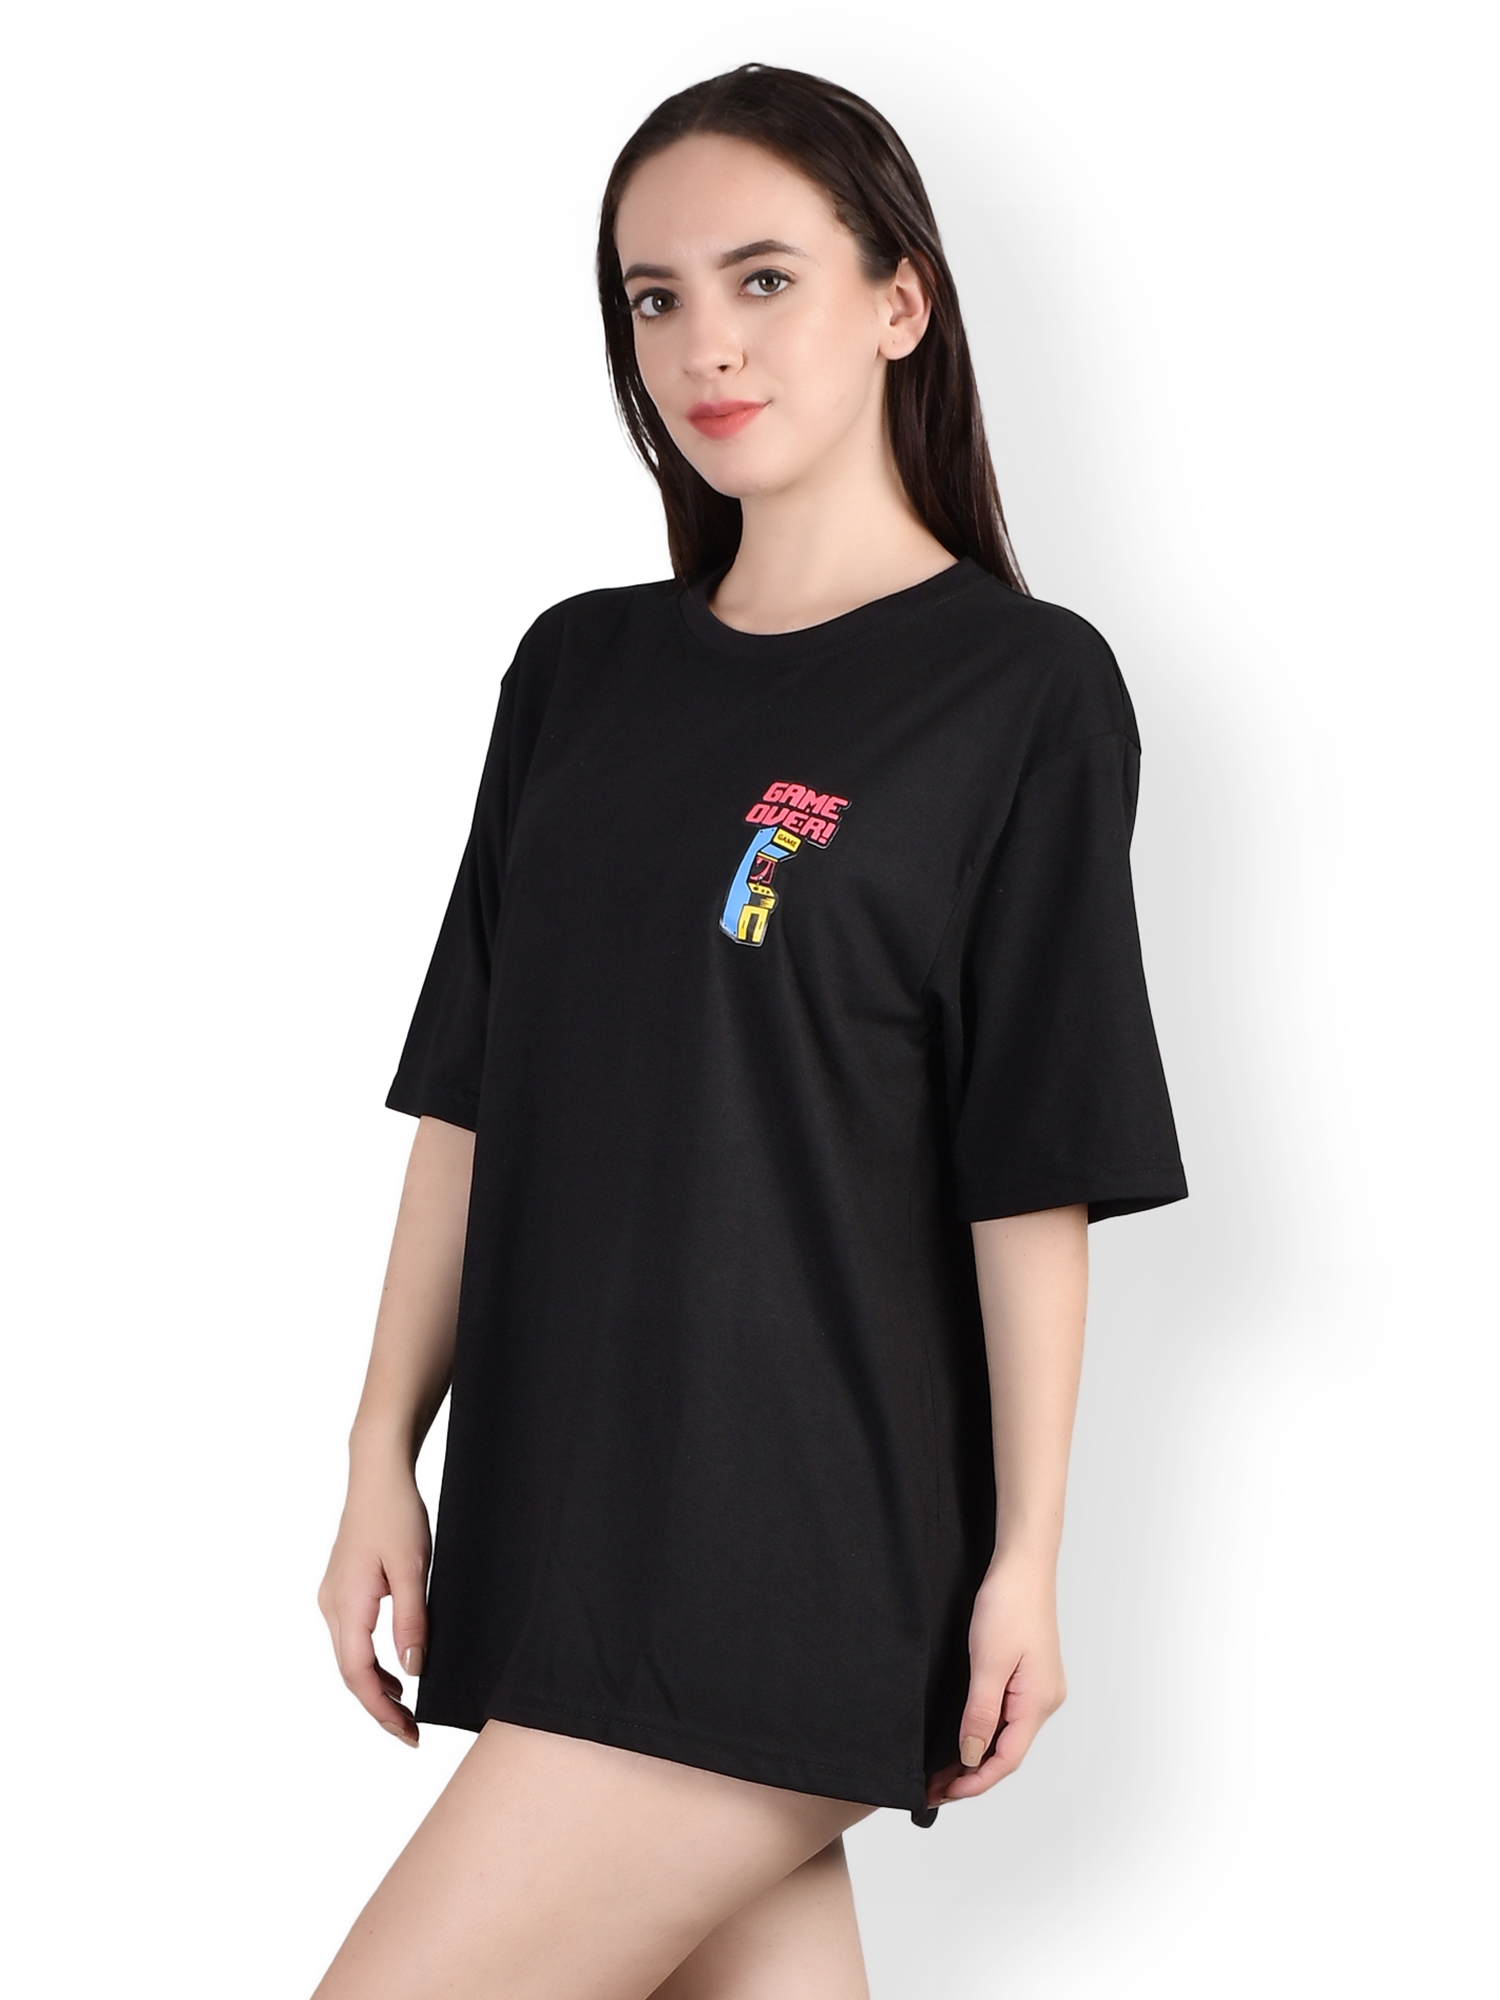 Game Over : Quirky Printed Oversized Women's Tees In Black Color